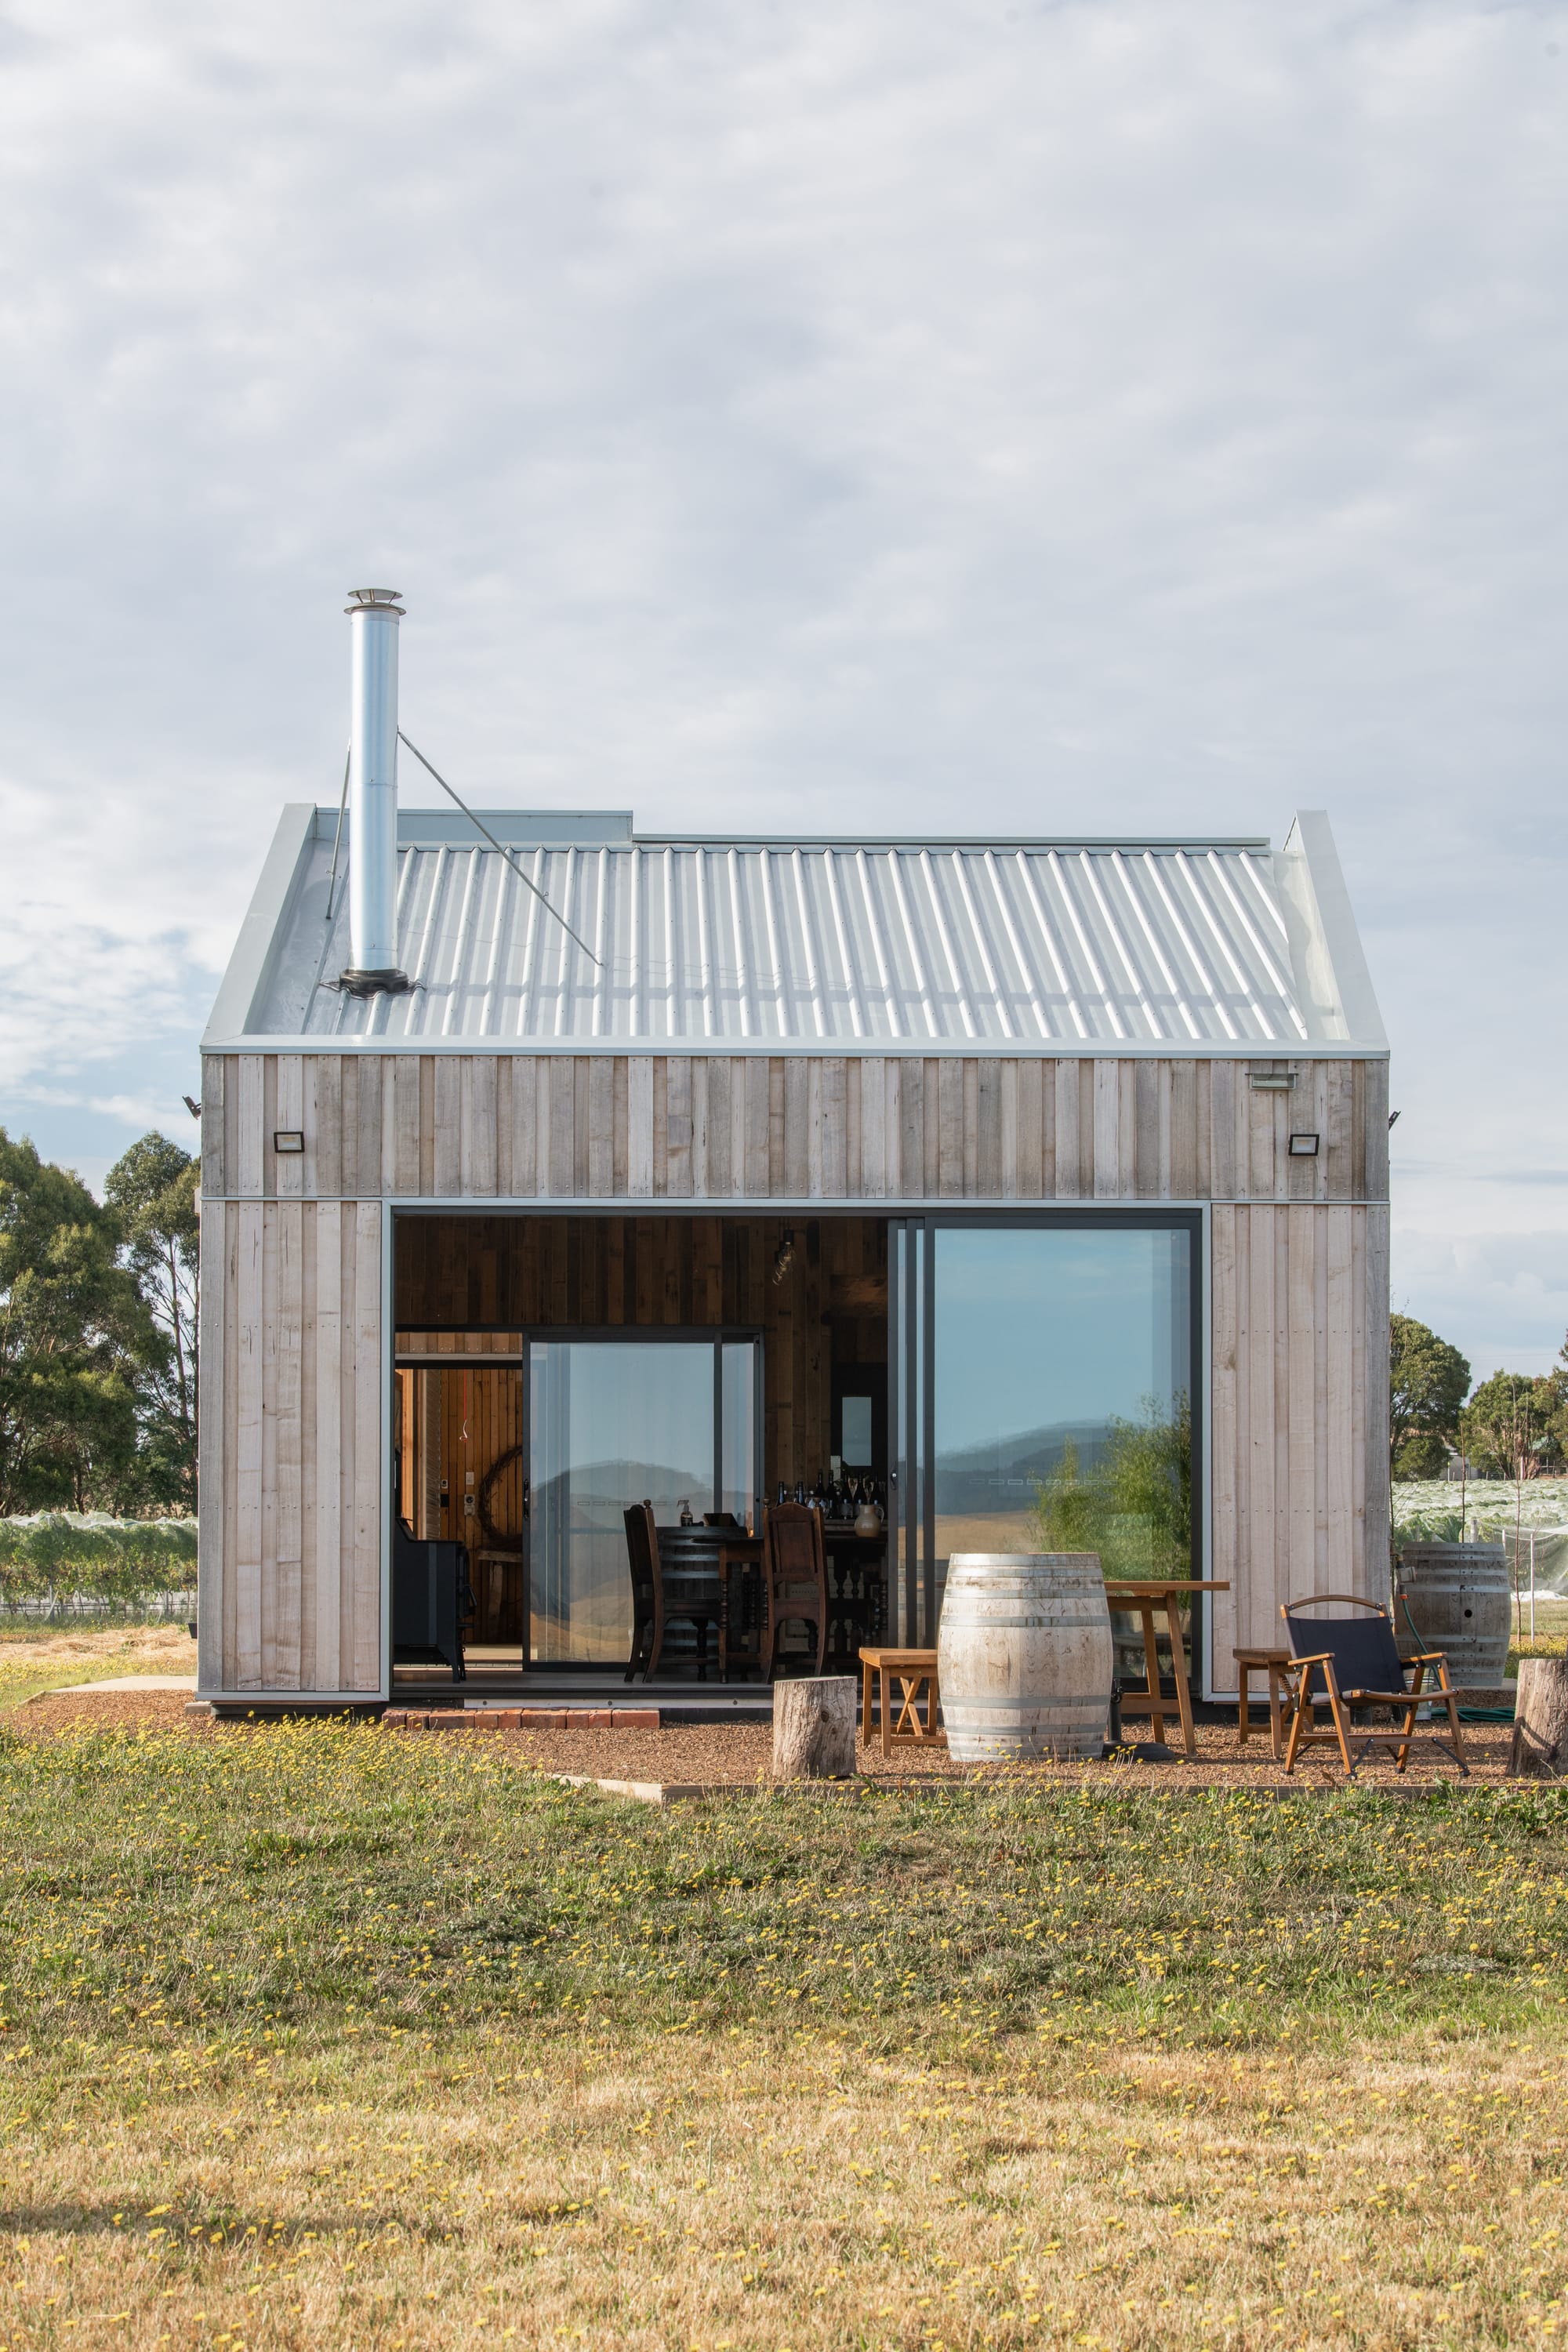 Tasmanian Timber Series: Westella Vineyard.The façade of the winery, featuring large glass doors flanked by timber walls, with a stainless steel chimney and outdoor seating that invites visitors to enjoy the vineyard's serene environment.